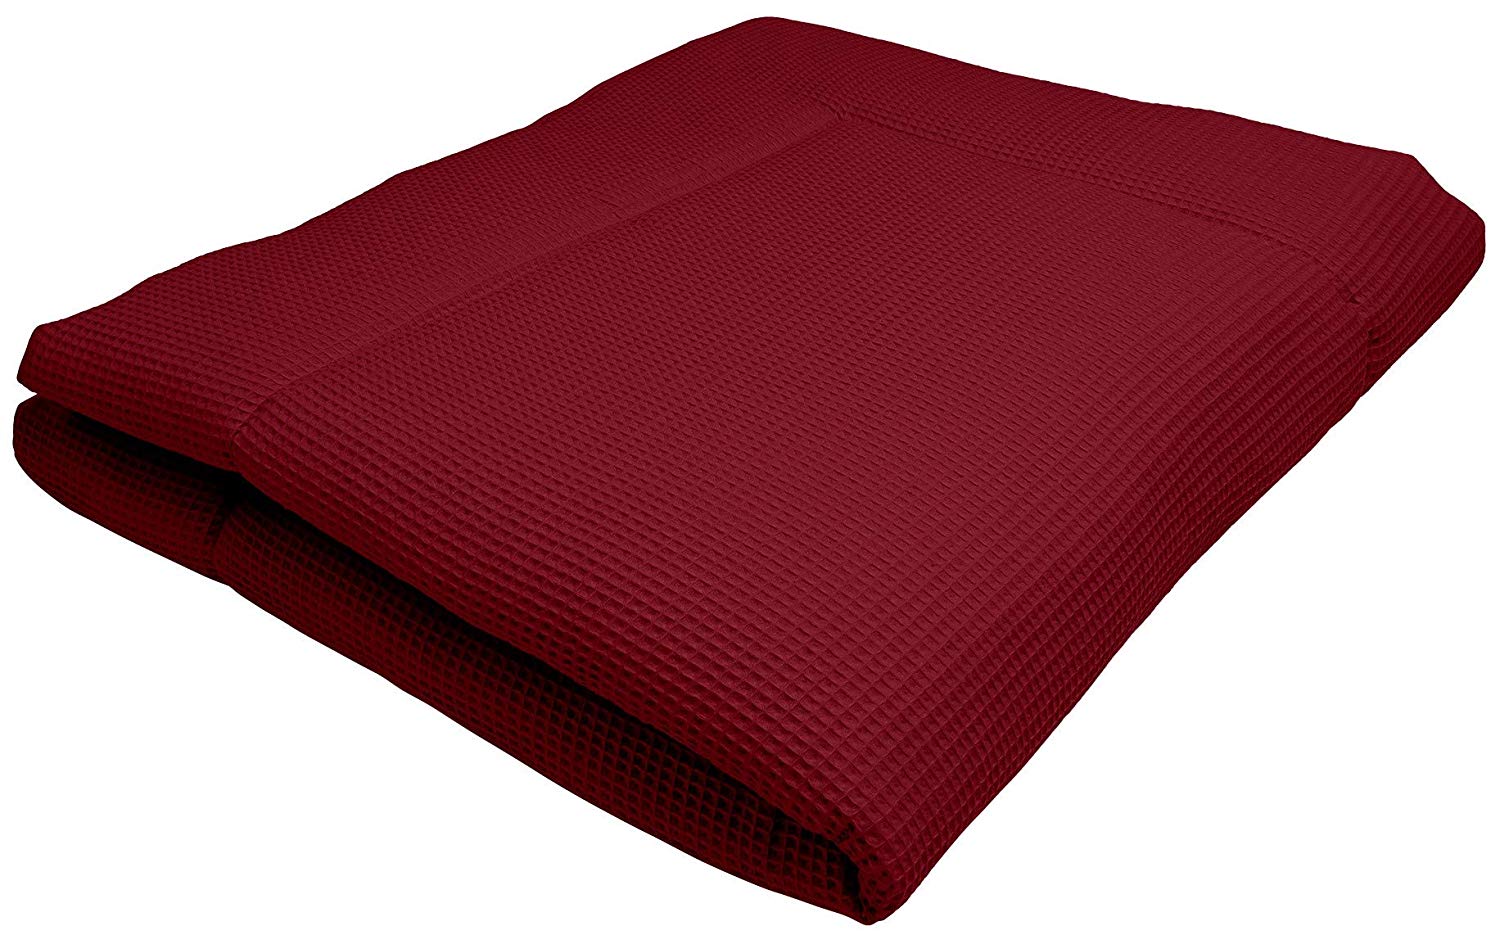 Ideenreich Ideenreich 2479 Baby Crawling Blanket King Size Berry 135 x 150 cm Ideal as Play Mat and Playpen Insert Red